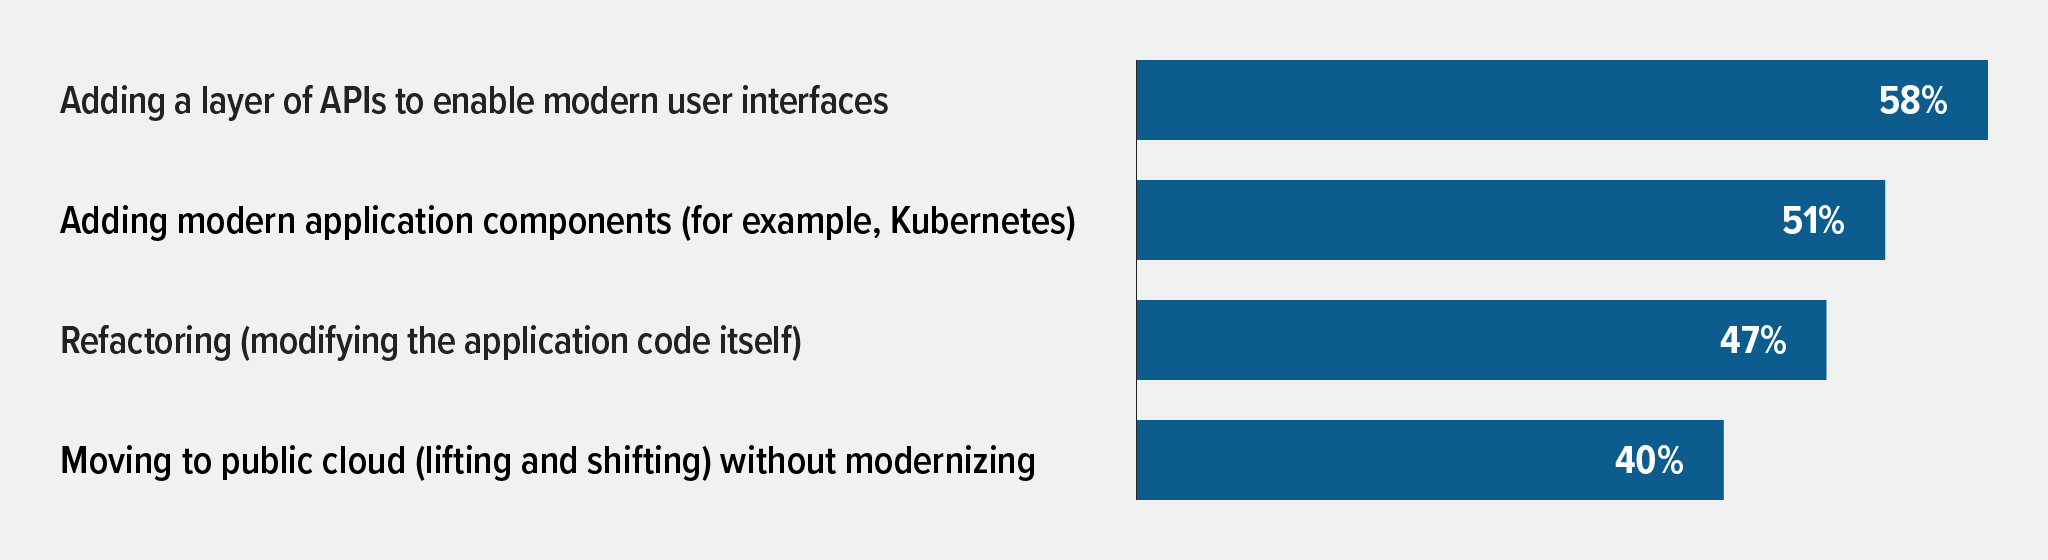 Horizontal bar graph showing percentage of organizations modernizing in four different ways